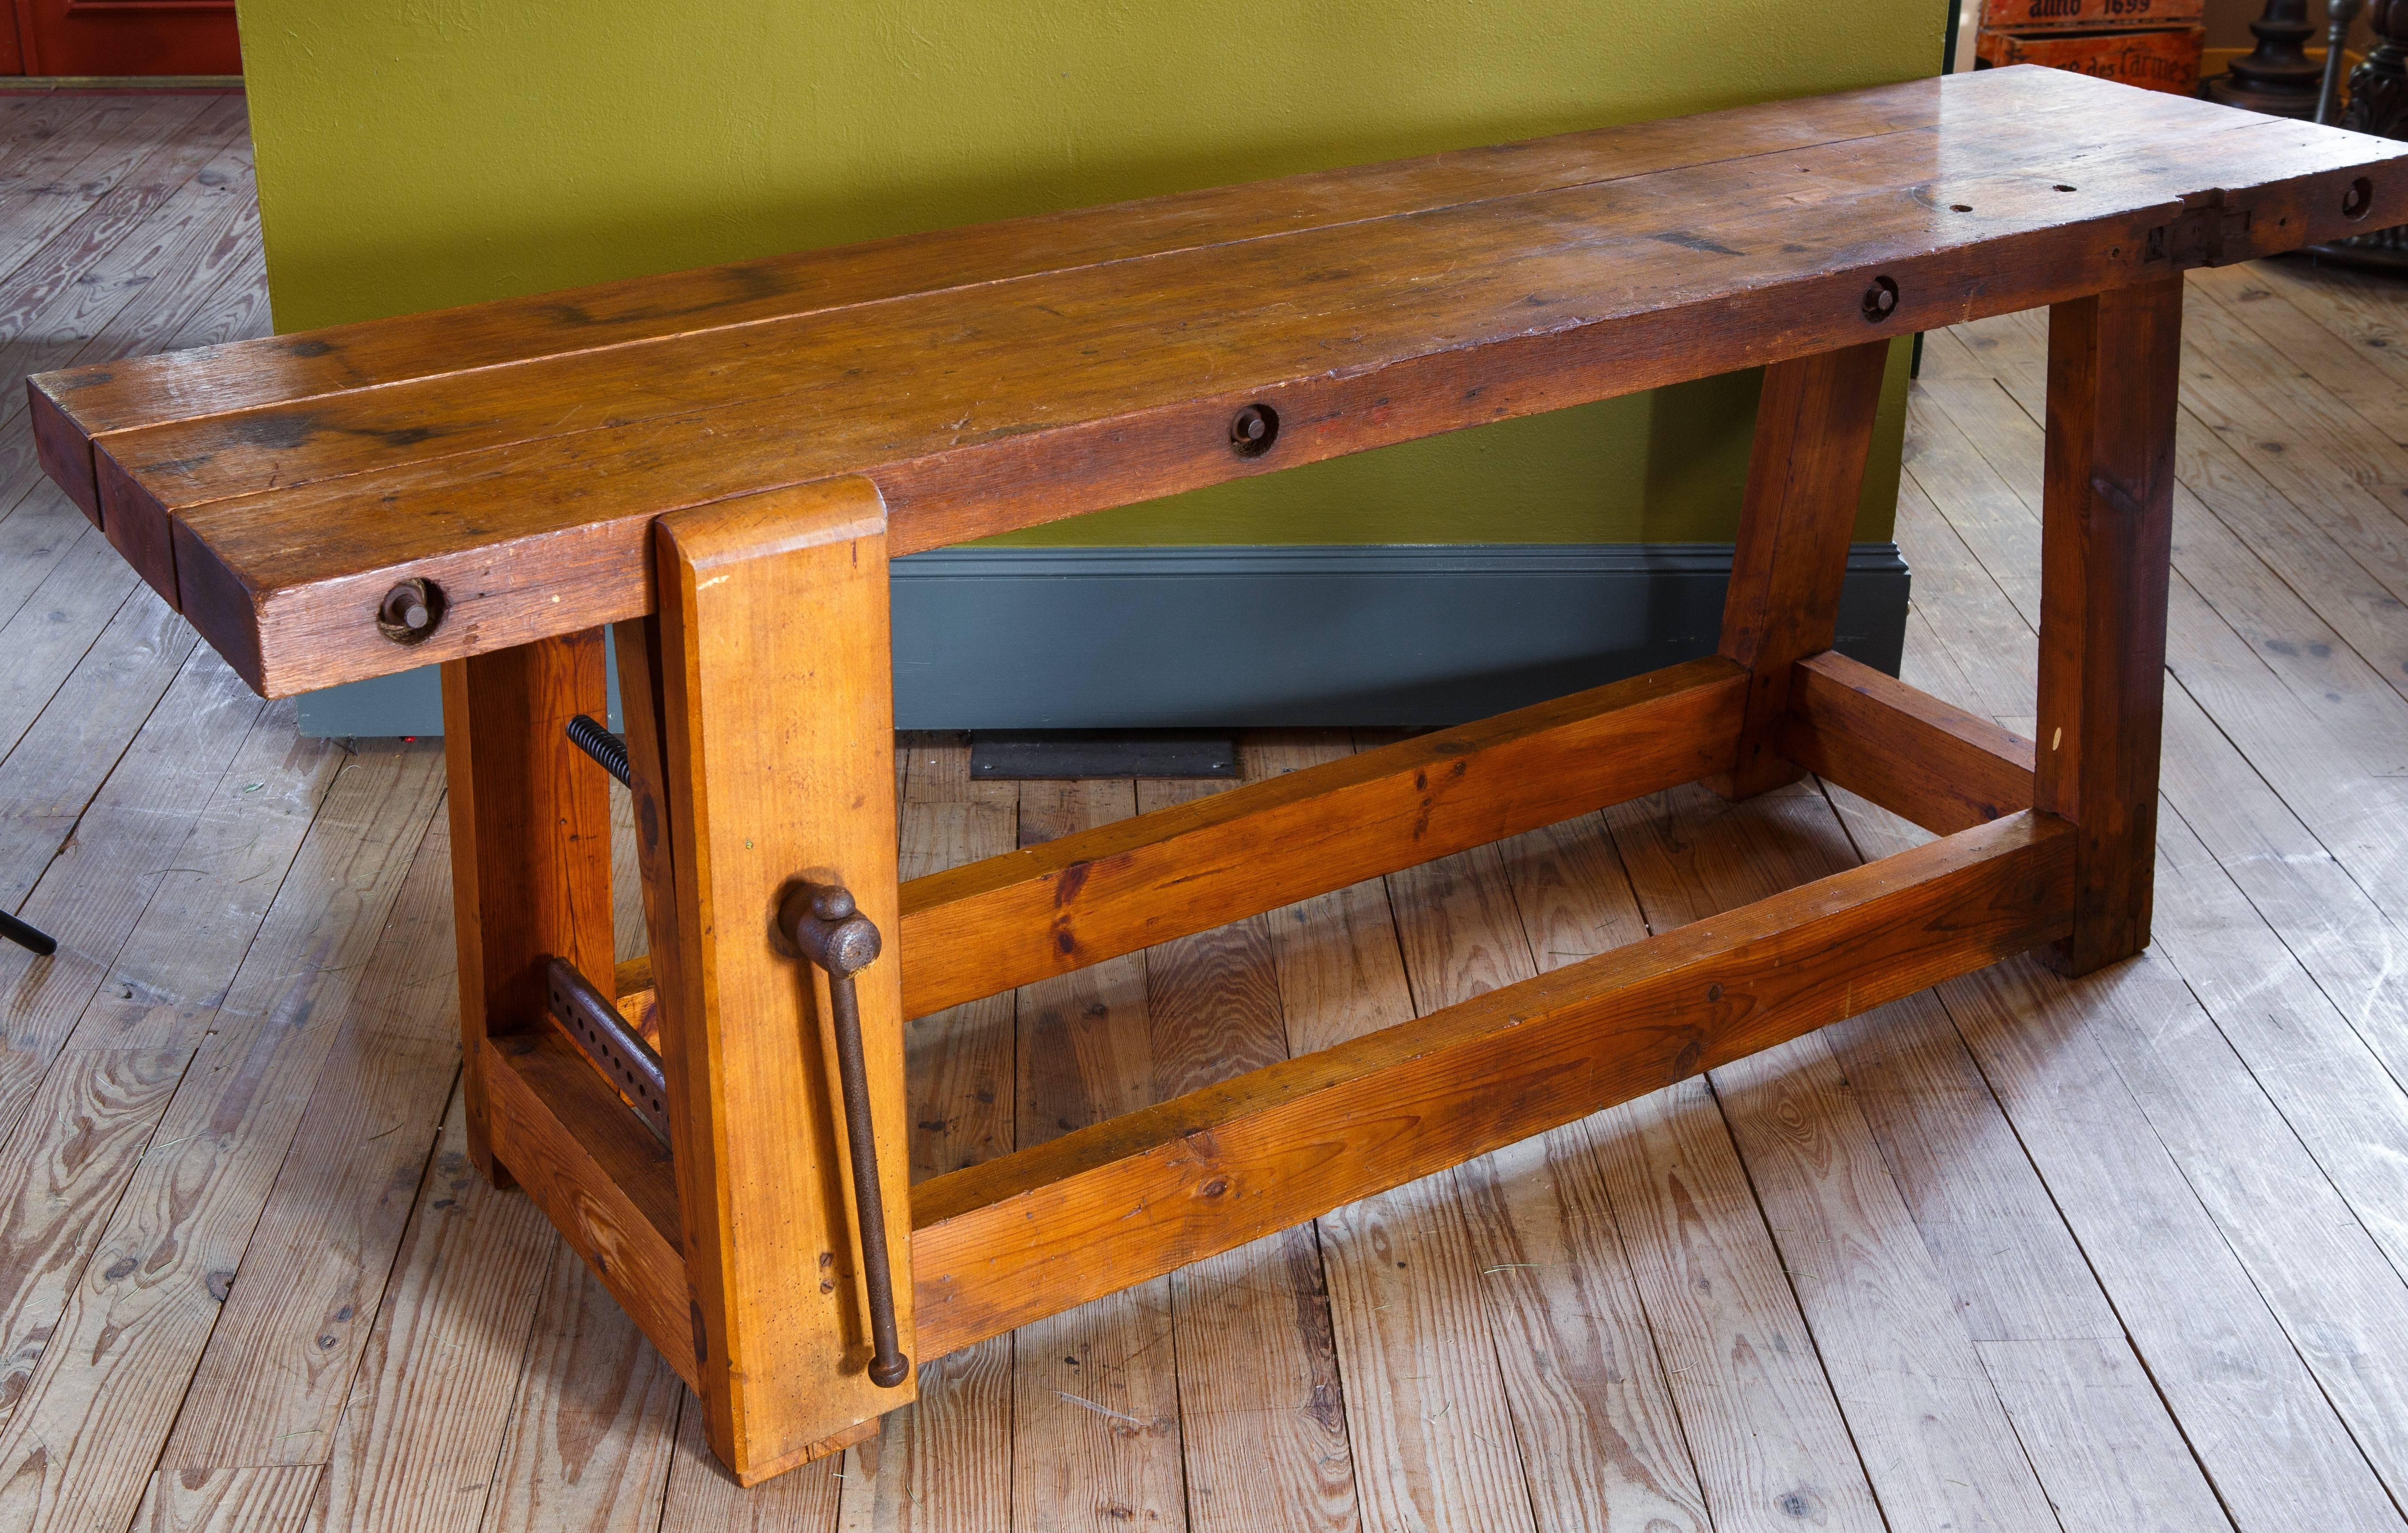 All original wooden workbench/ worktable from Belgium, circa 1920. Includes the original metal and wood clamp/vise on one side. Entire piece is handmade. Interesting rustic and Industrial hybrid style. Would make an excellent work bench, console